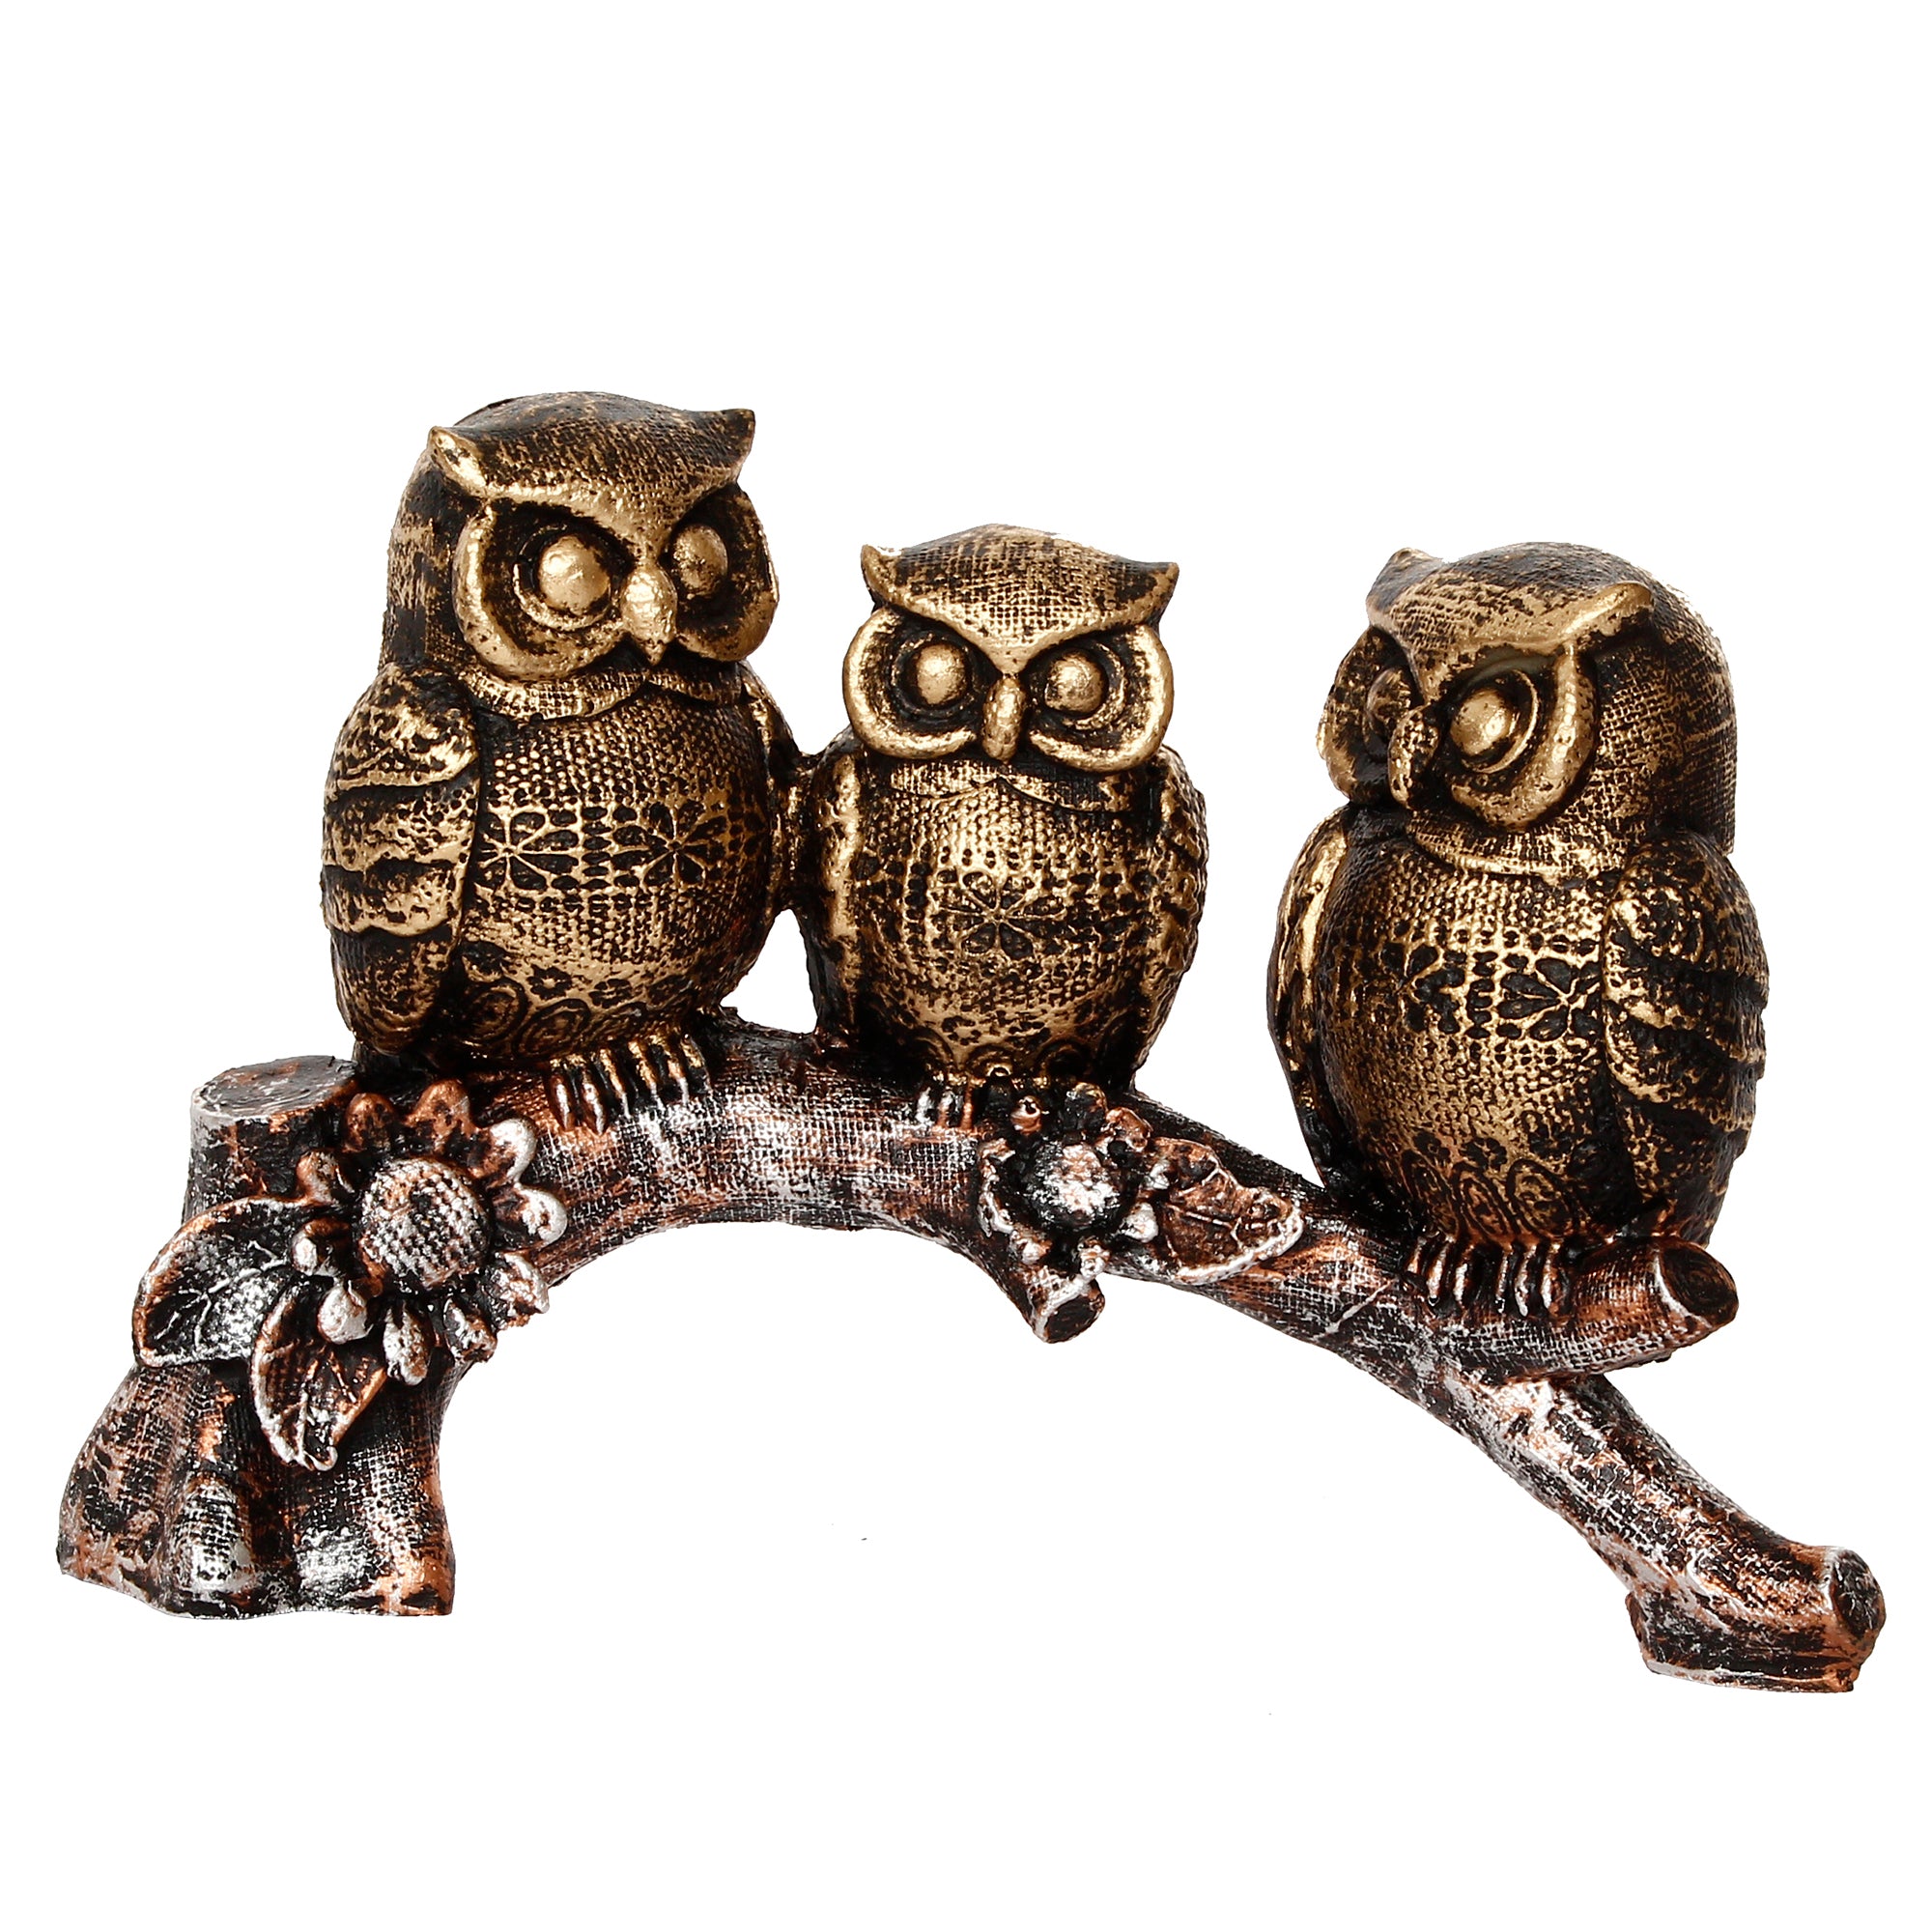 3 Owl Sitting on Branch Antique Finish Handcrafted Polyresin Decorative Showpiece 2